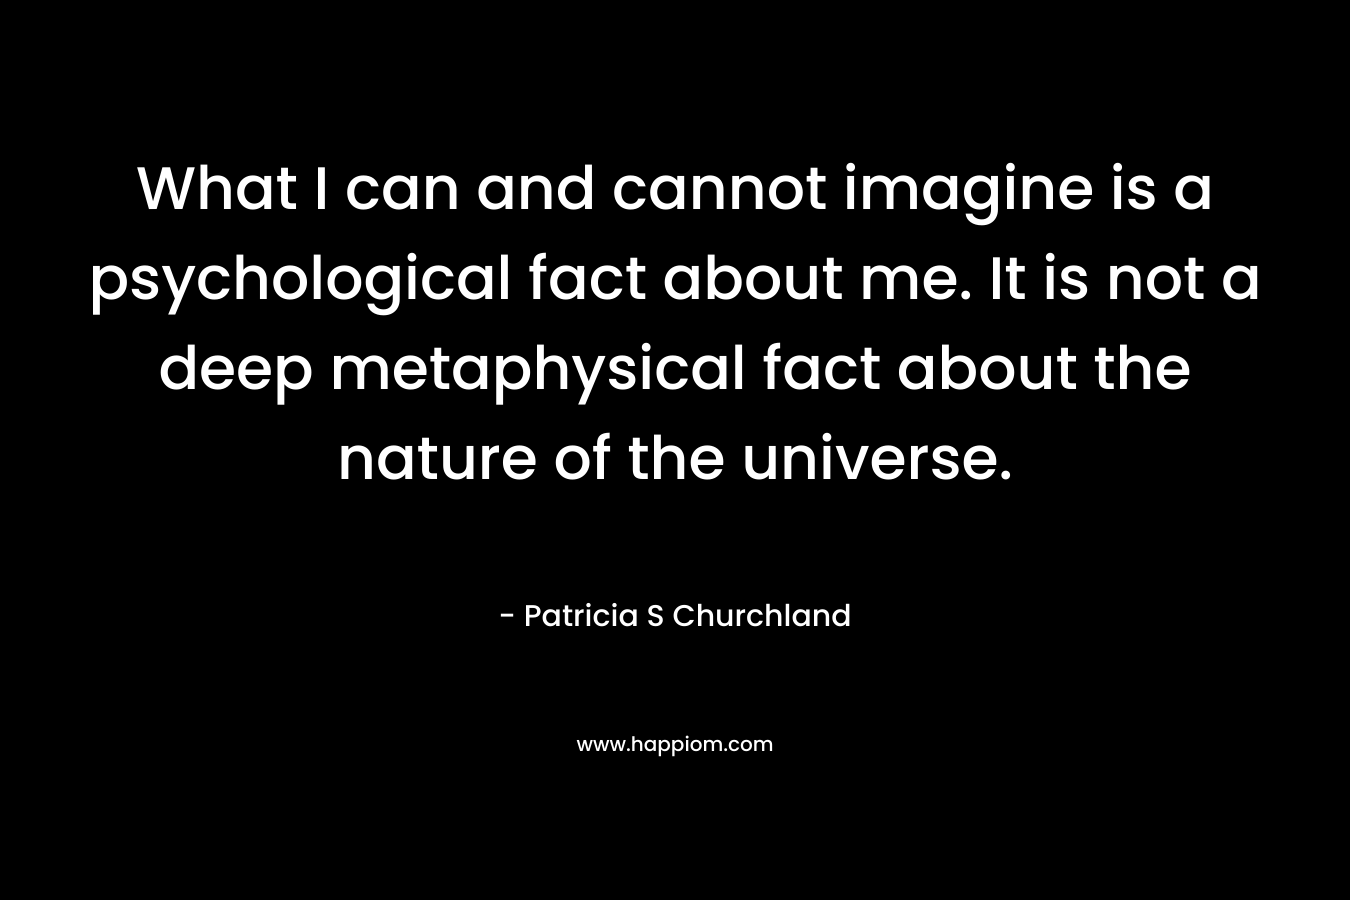 What I can and cannot imagine is a psychological fact about me. It is not a deep metaphysical fact about the nature of the universe.